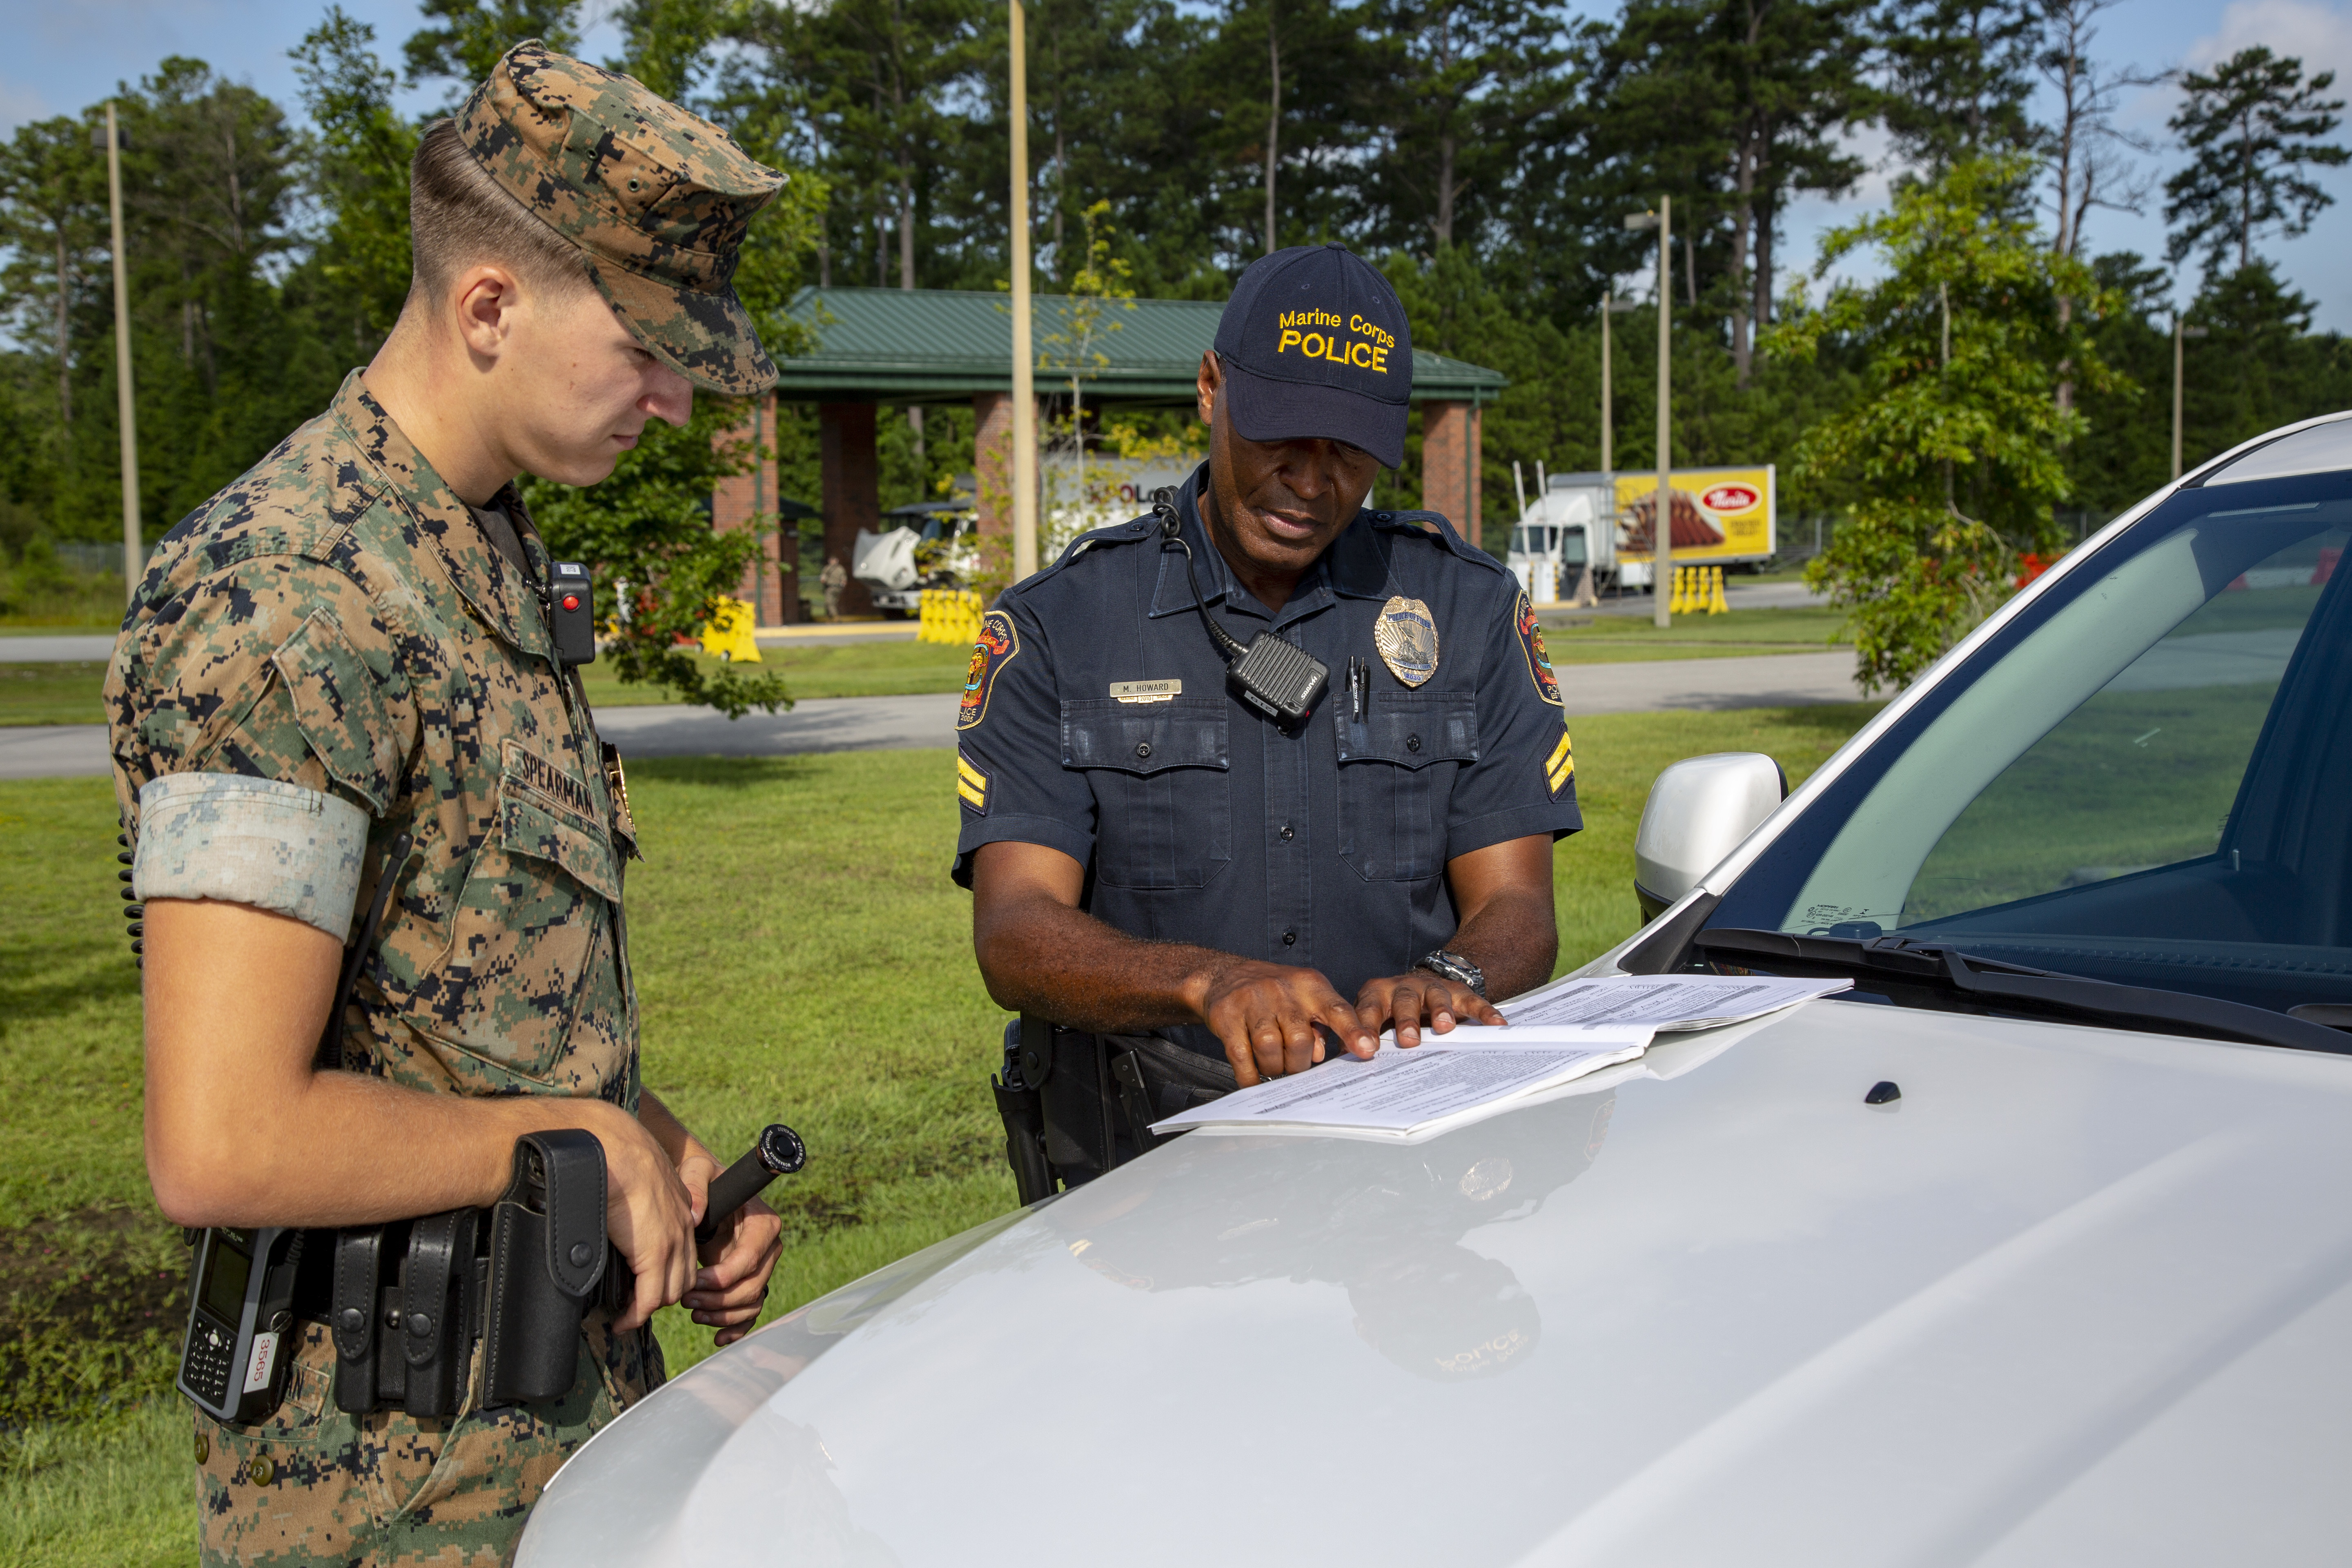 How To Become A Marine Corps Police Officer Operation Military Kids ...